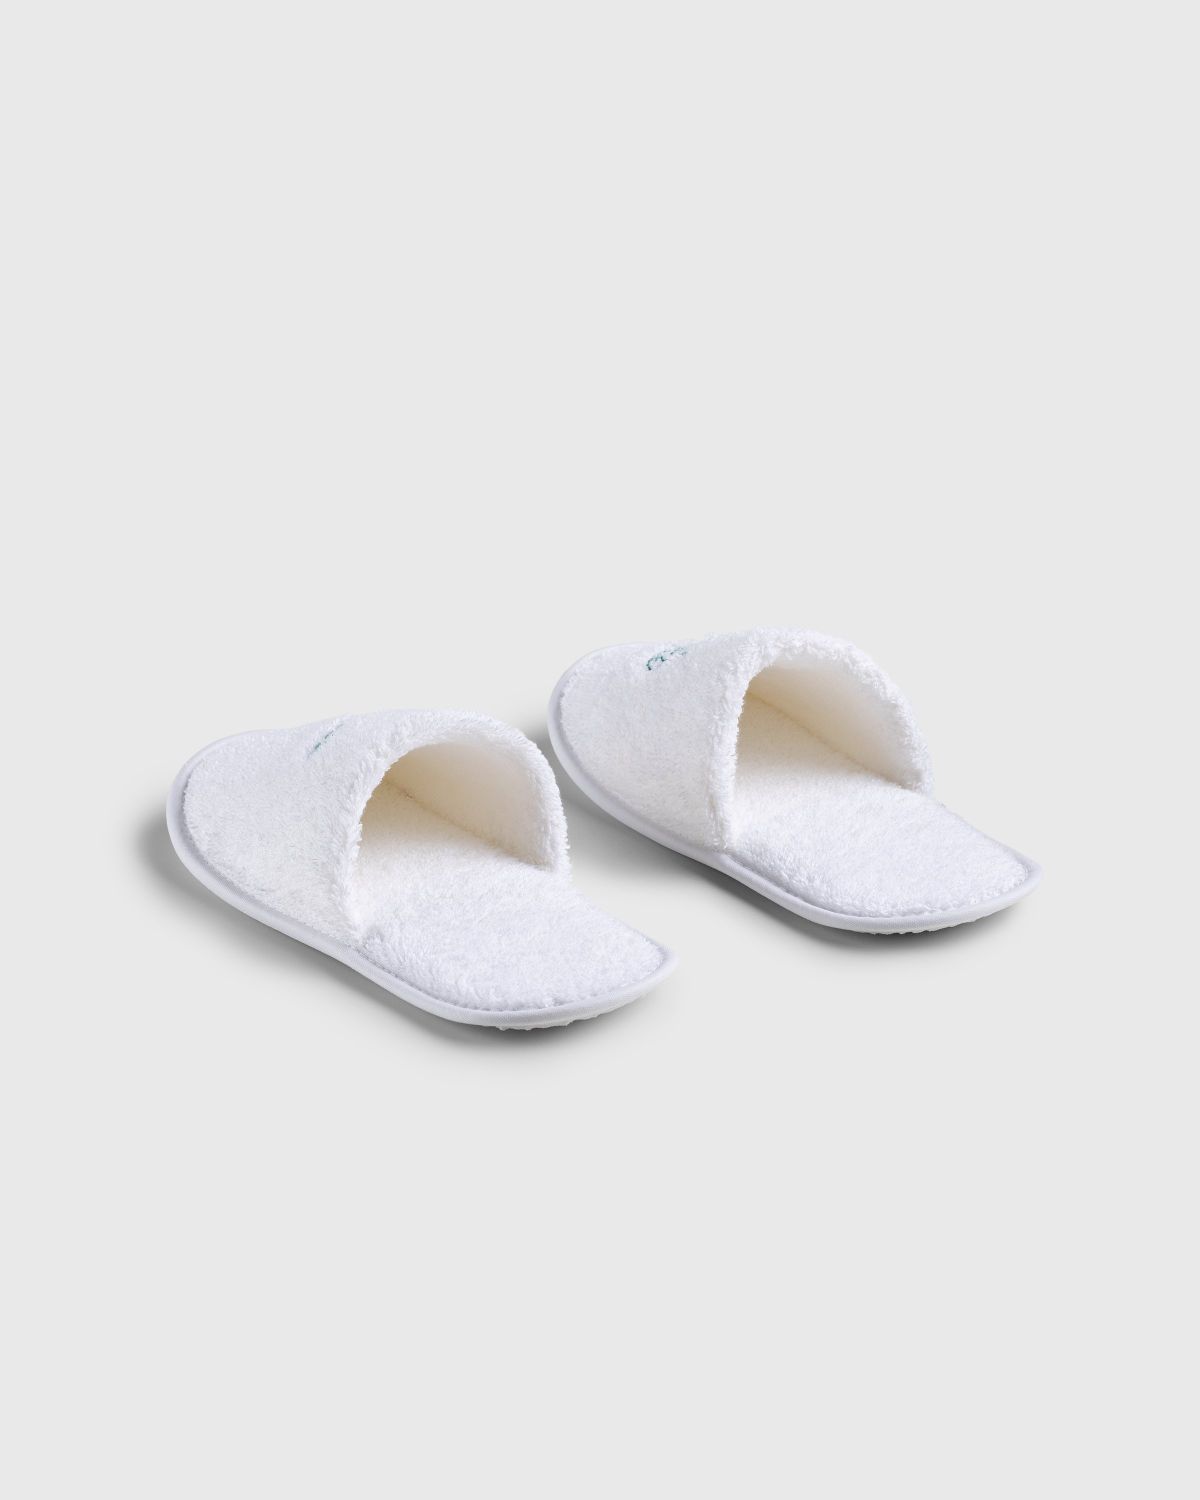 Hotel Amour x Highsnobiety – Not In Paris 4 Slippers White - Sandals - White - Image 5